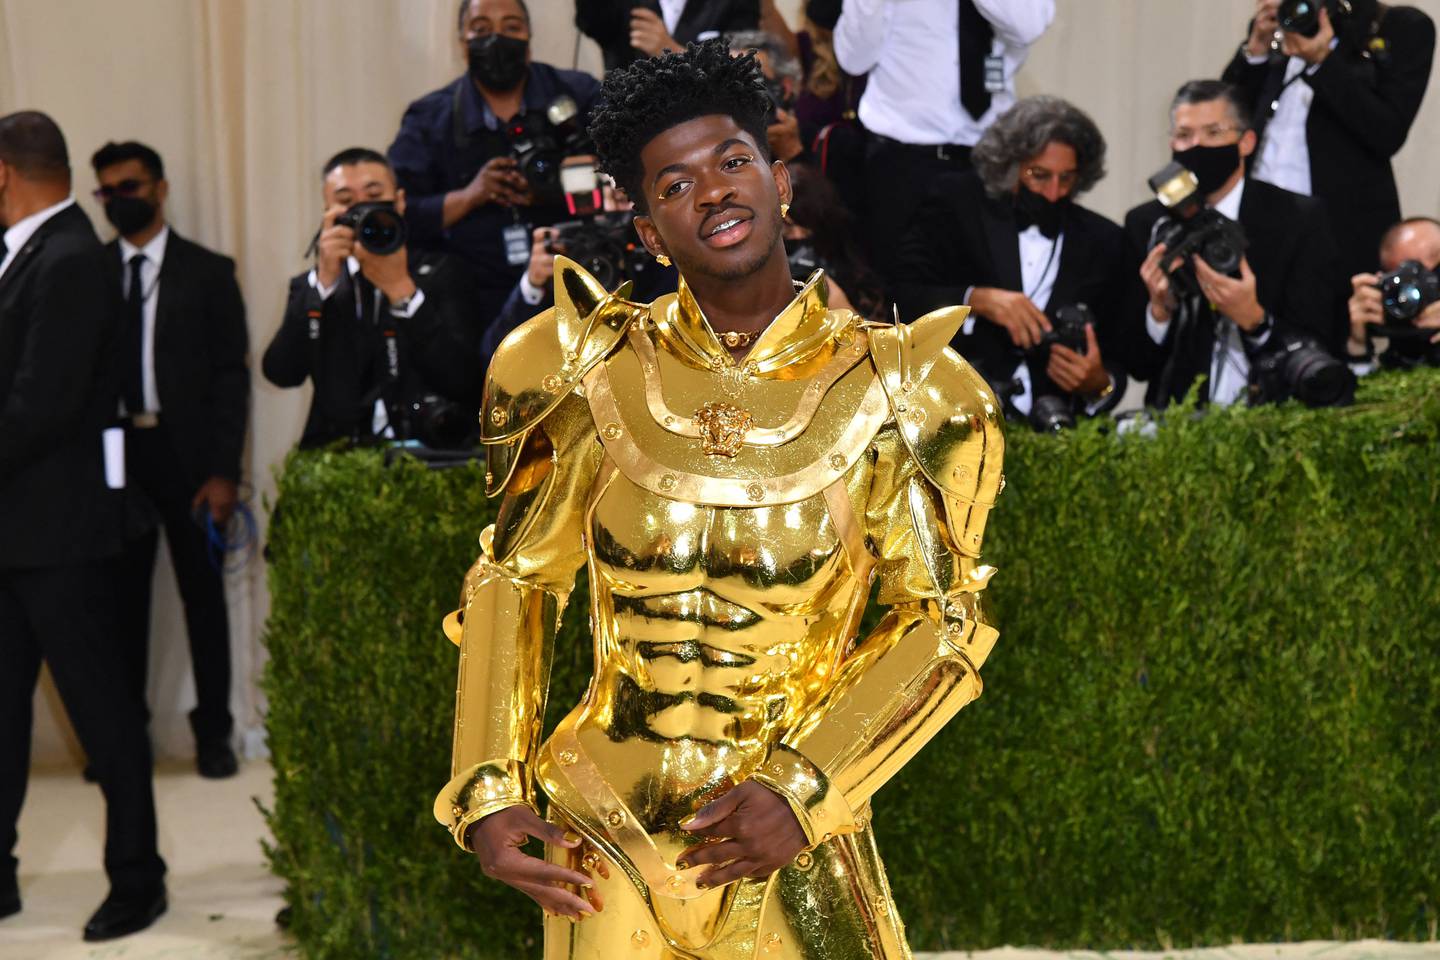 US rapper Lil Nas X arrives for the 2021 Met Gala at the Metropolitan Museum of Art earlier this month. With just one album out, Lil Nas X is already worth an estimated $7 million. AFP